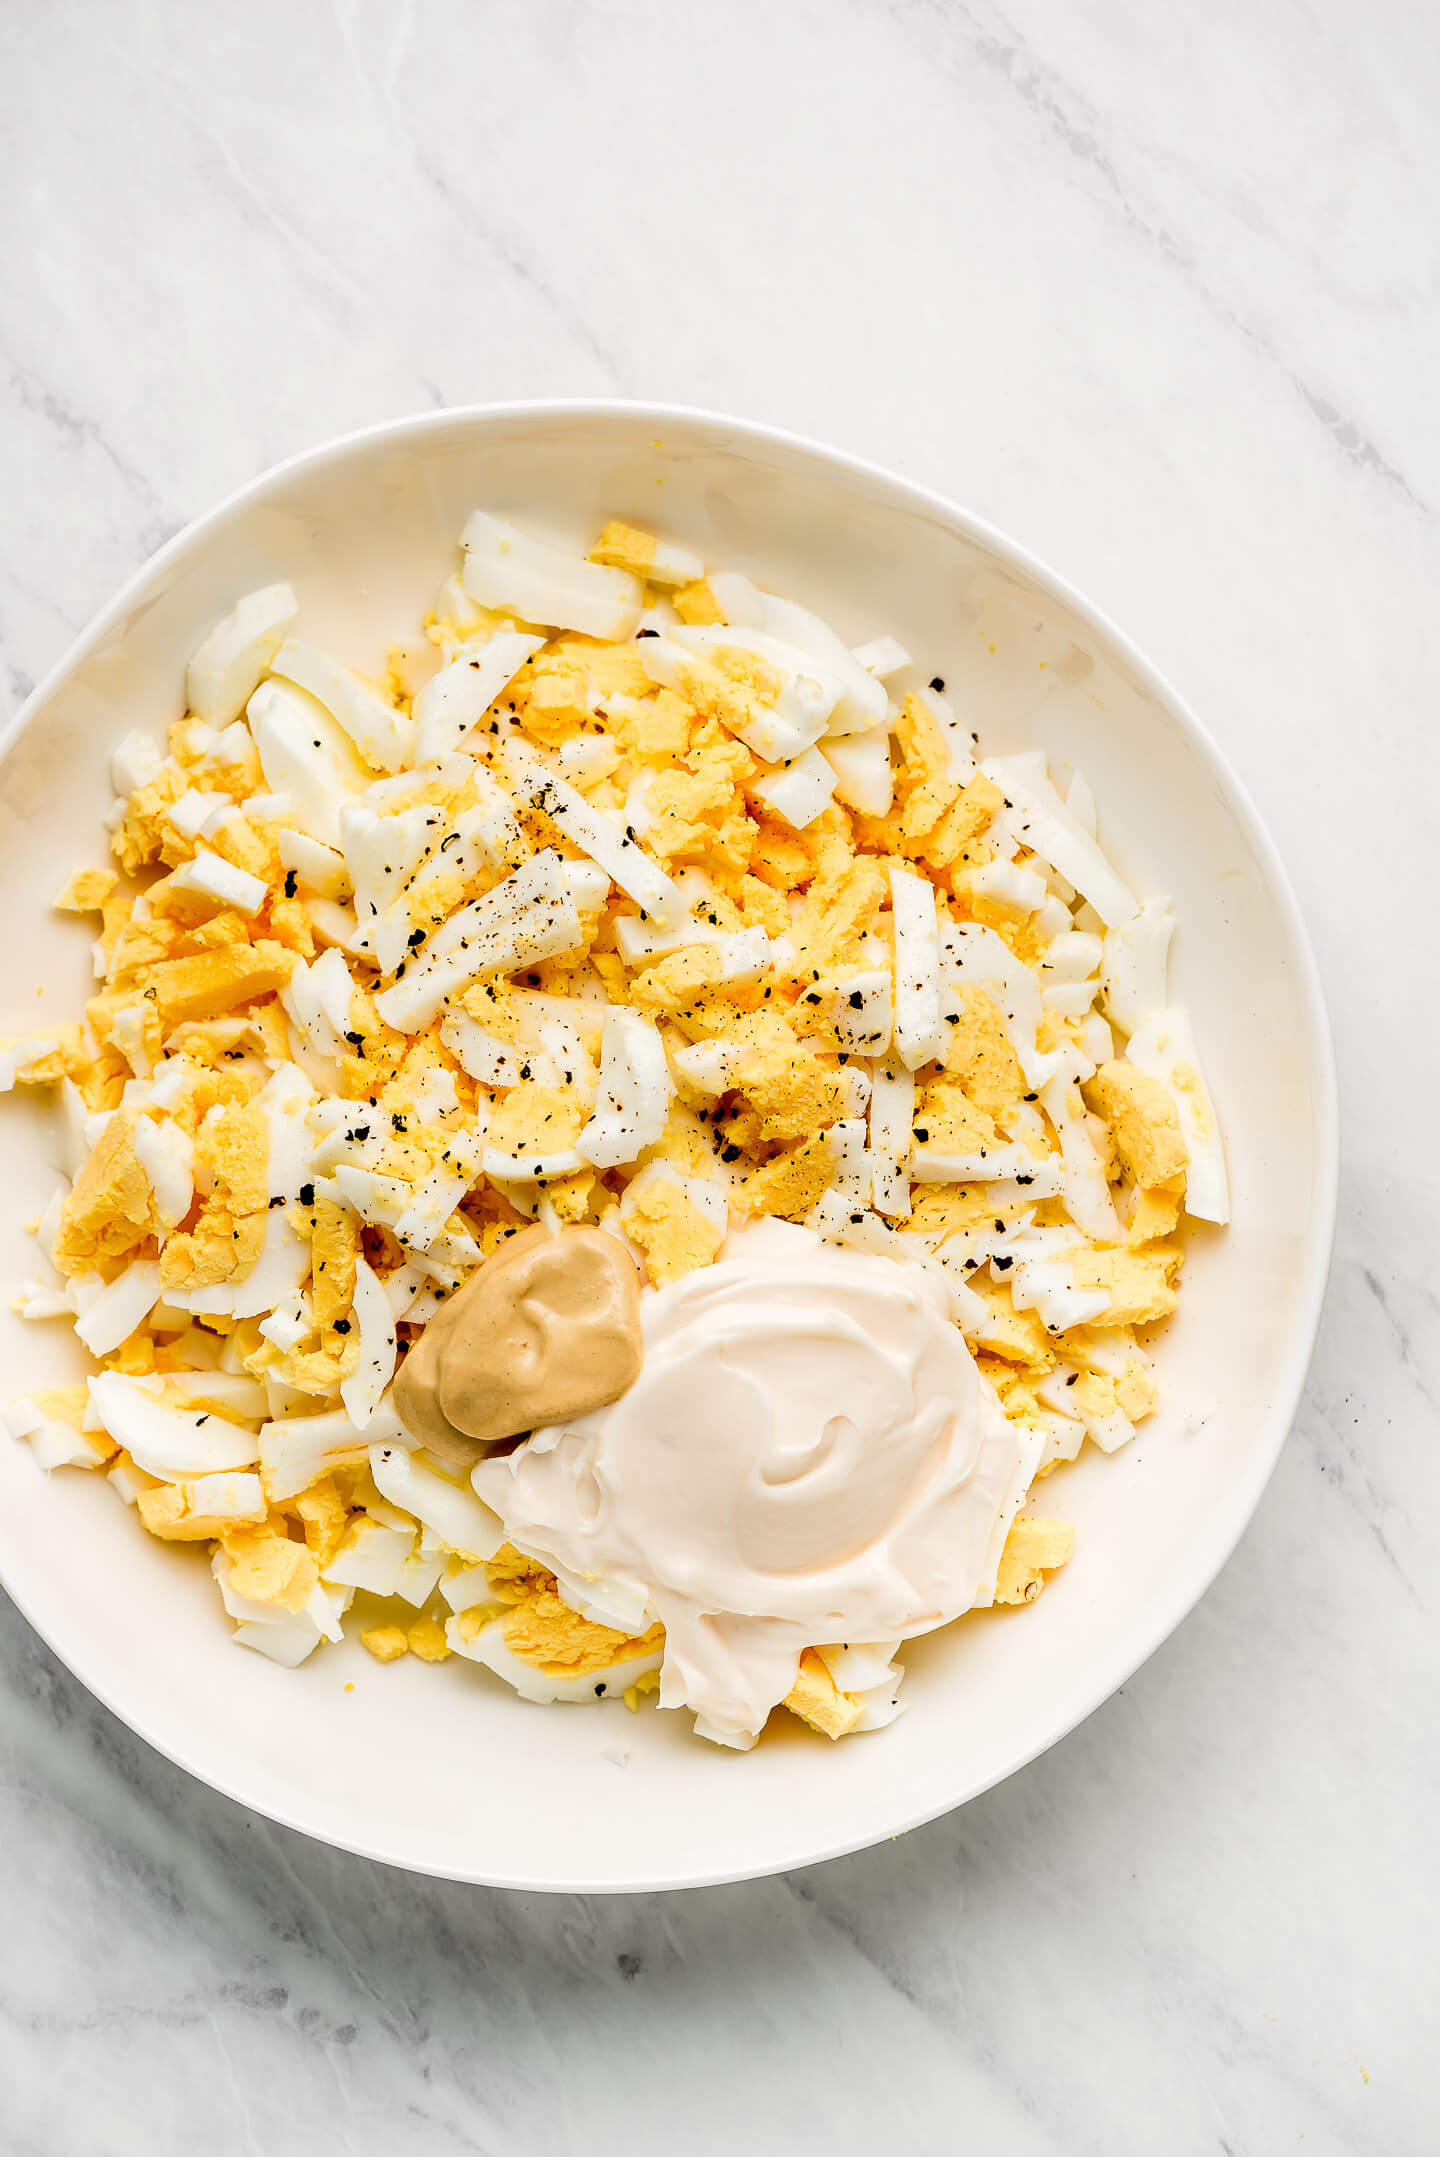 A bowl of chopped hard boiled eggs, mayonnaise, mustard, and salt & pepper.